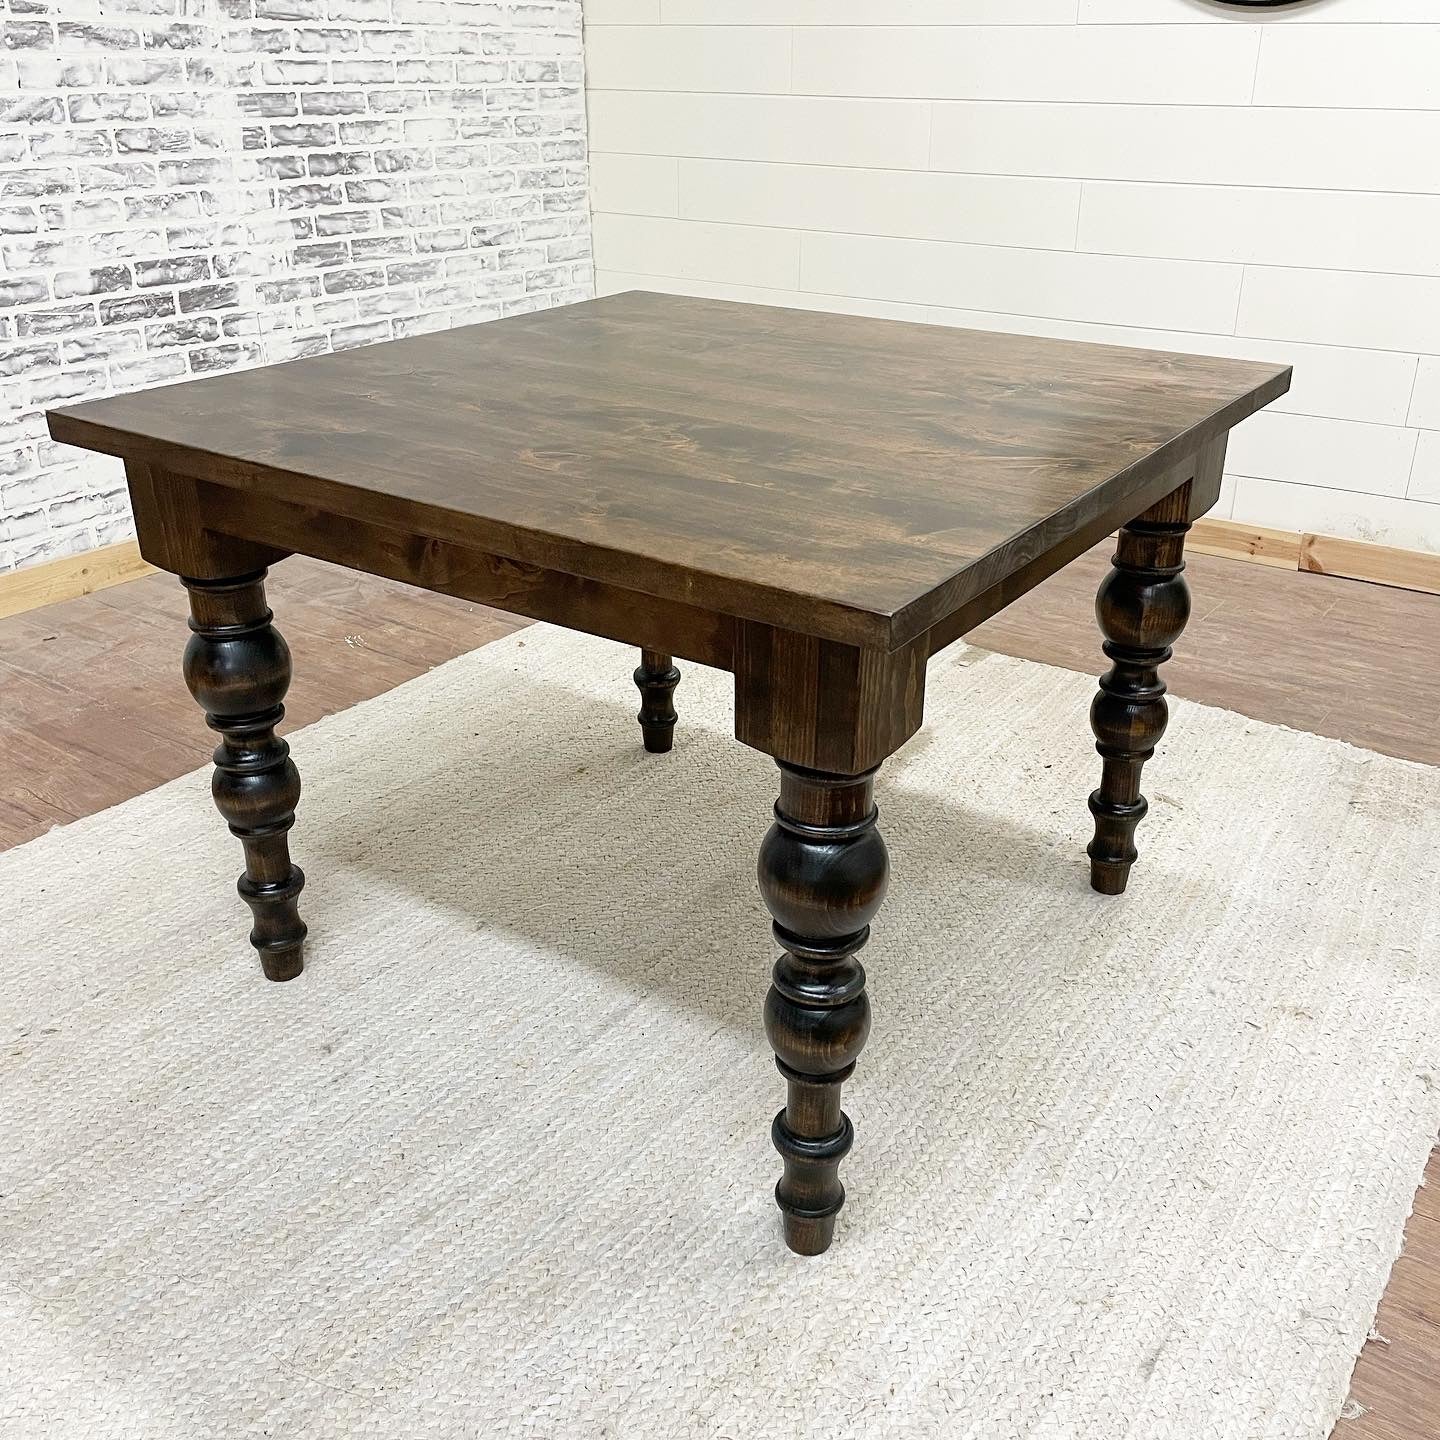 Pictured with a 42" L x 42" W Rustic Alder table stained Espresso.